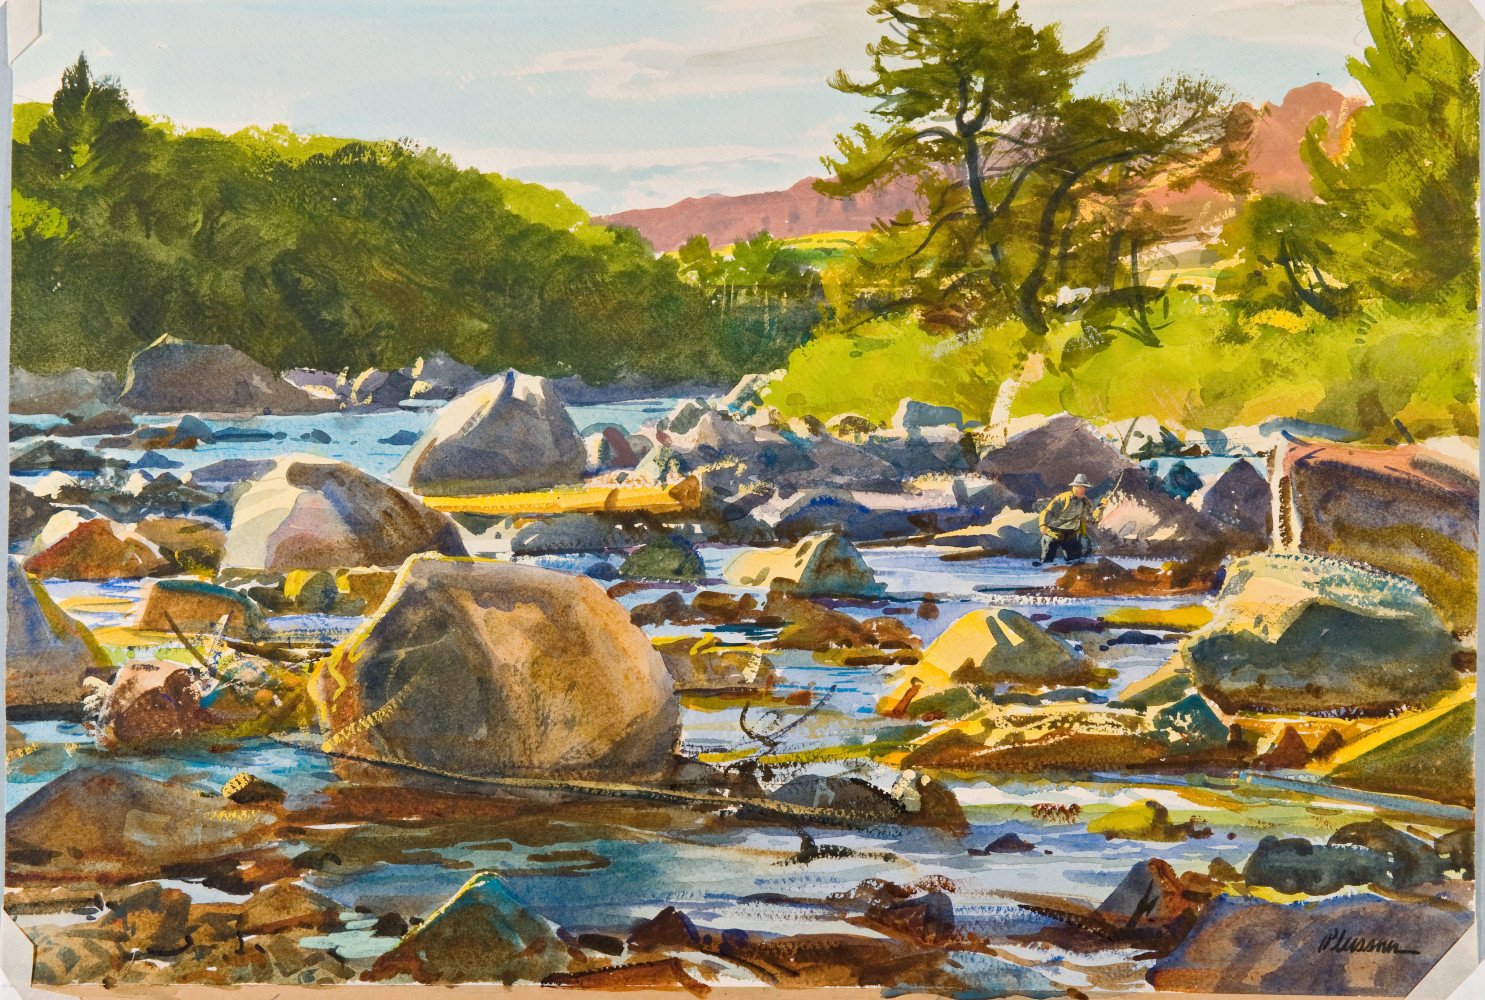 On the Wind River, date unknown, By Ogden M. Pleissner (American, 1905—1983); Watercolor and gouache on paper, 15 3/8 x 21 5/16 inches; Collection of Shelburne Museum, bequest of Ogden M. Pleissner; 1985-31.53. Photography by Andy Duback.